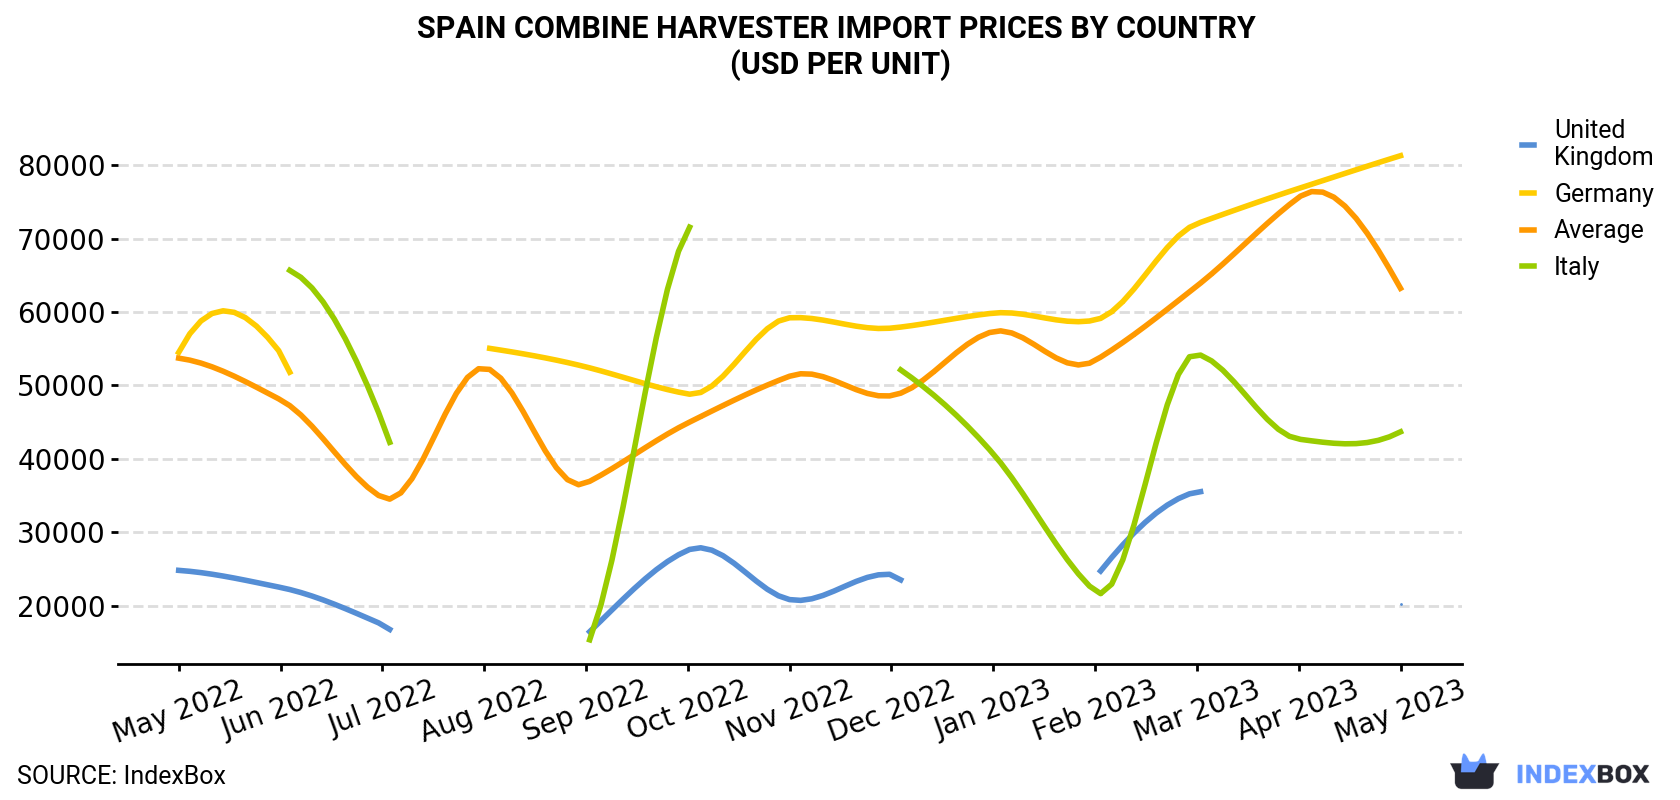 Spain Combine Harvester Import Prices By Country (USD Per Unit)